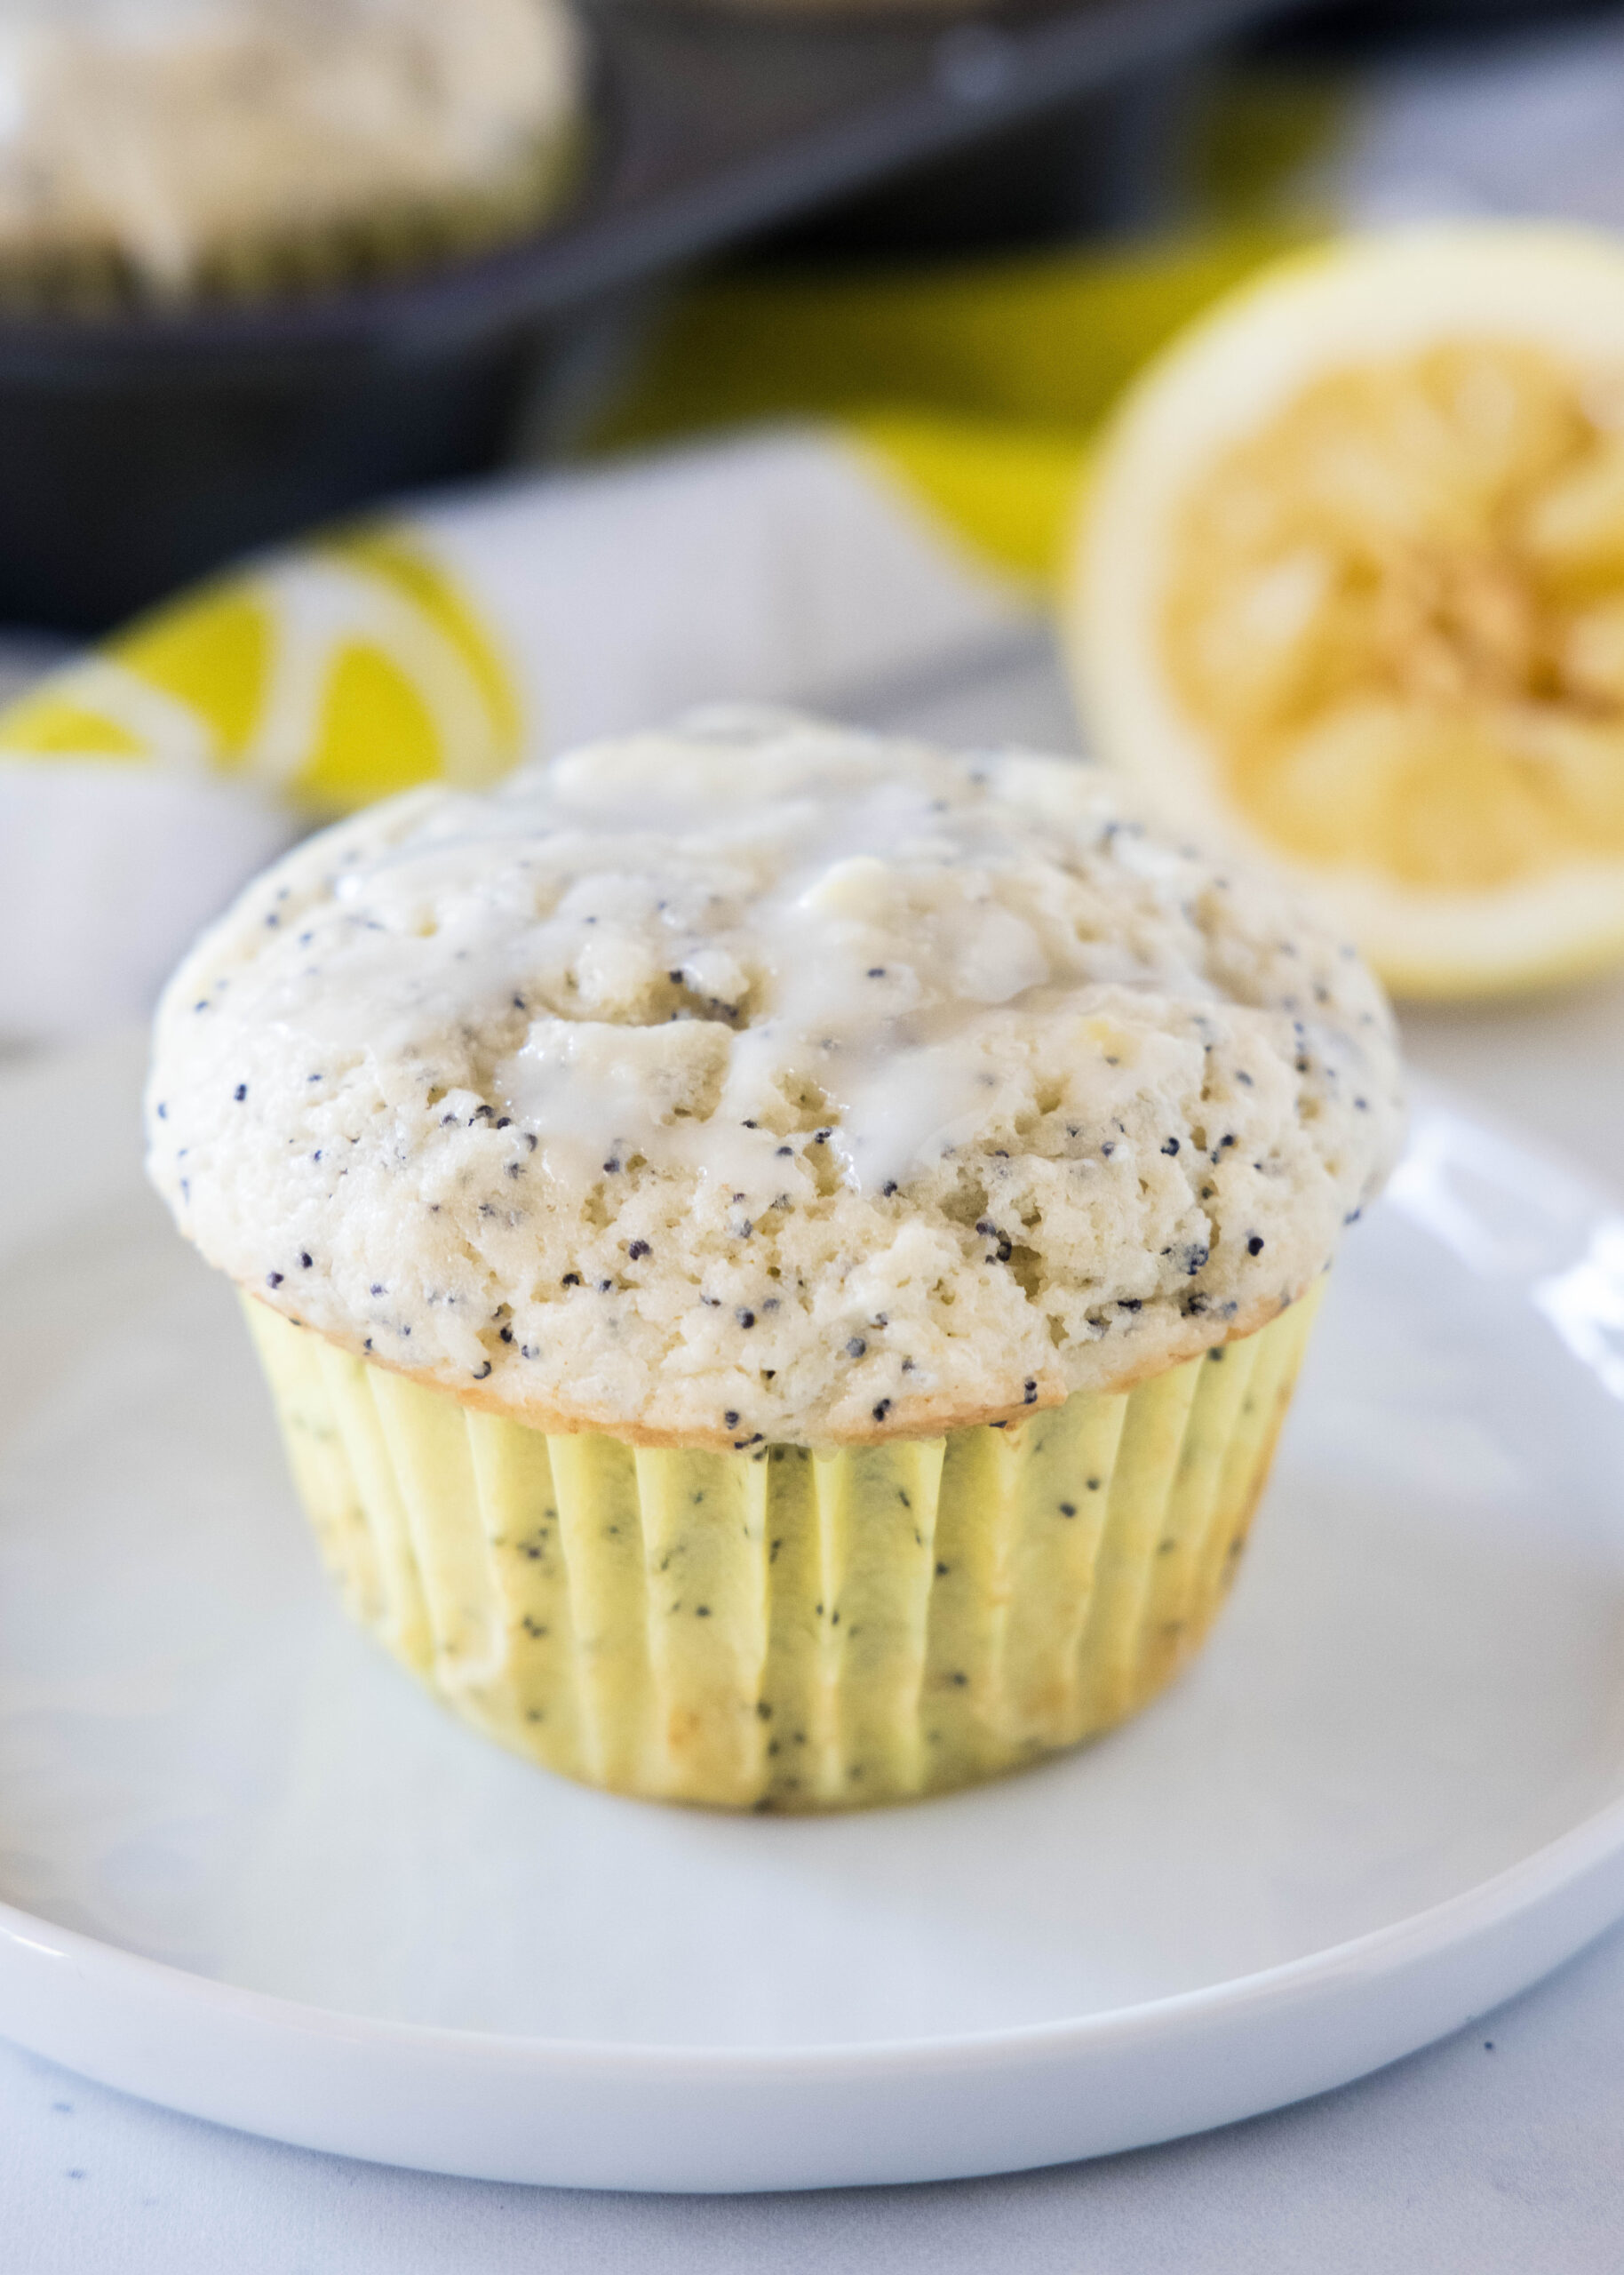 Close up of a lemon poppy seed muffin on a white plate.